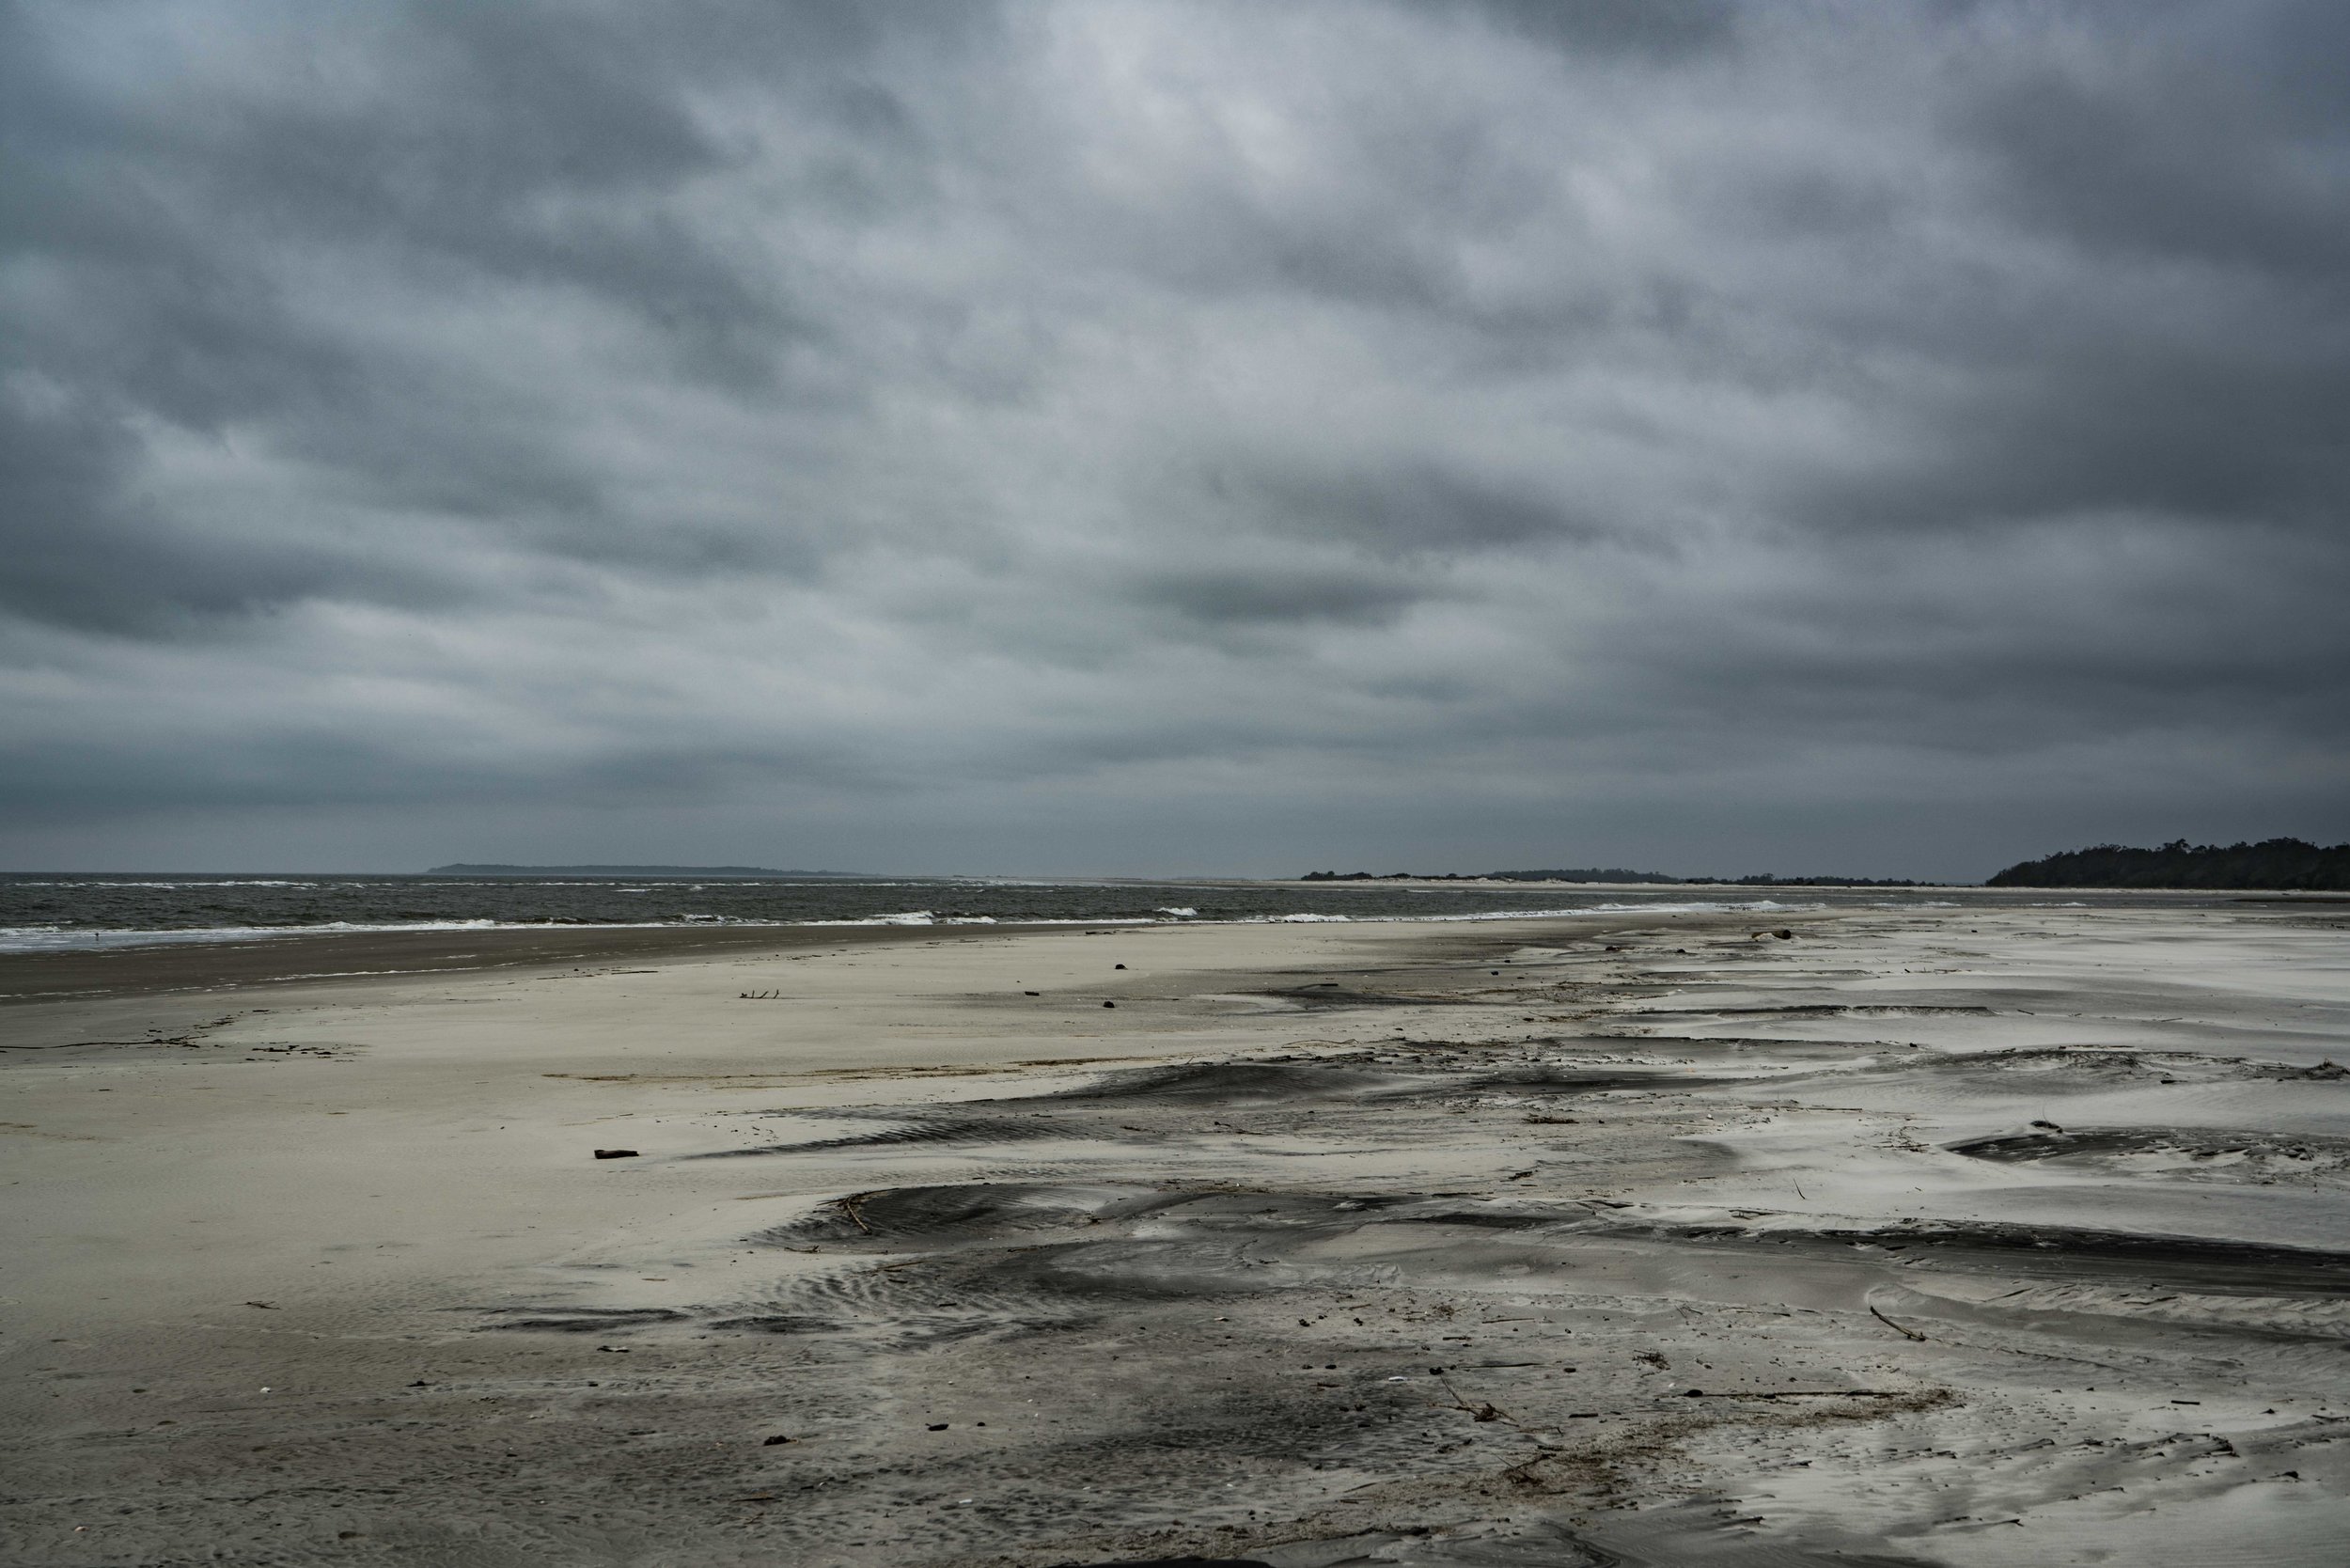 Stormy clouds over the beach on Little Tybee Island via micahdeyoung.com